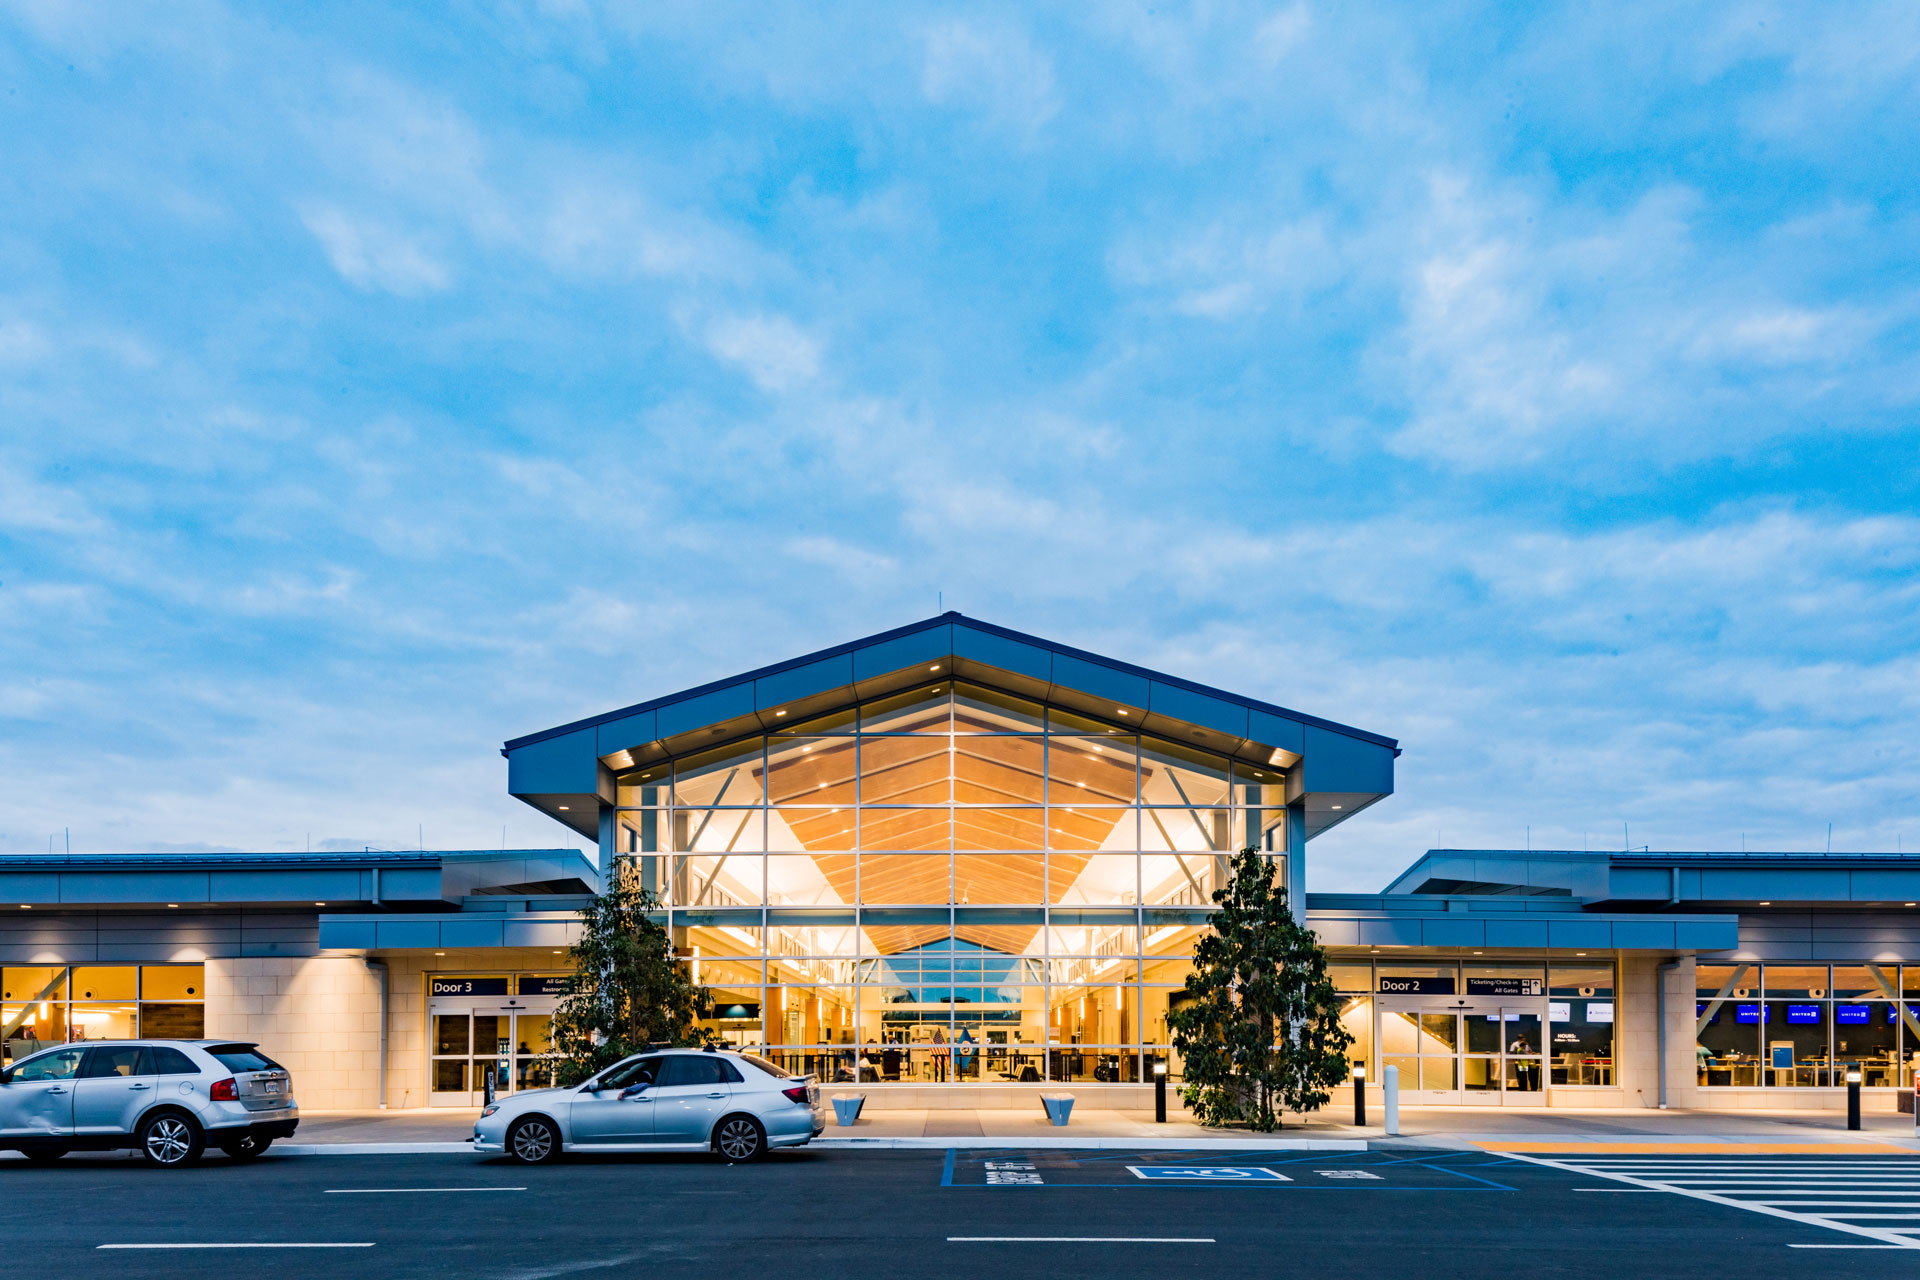 The front of the SLO Airport Terminal shining bright at dusk